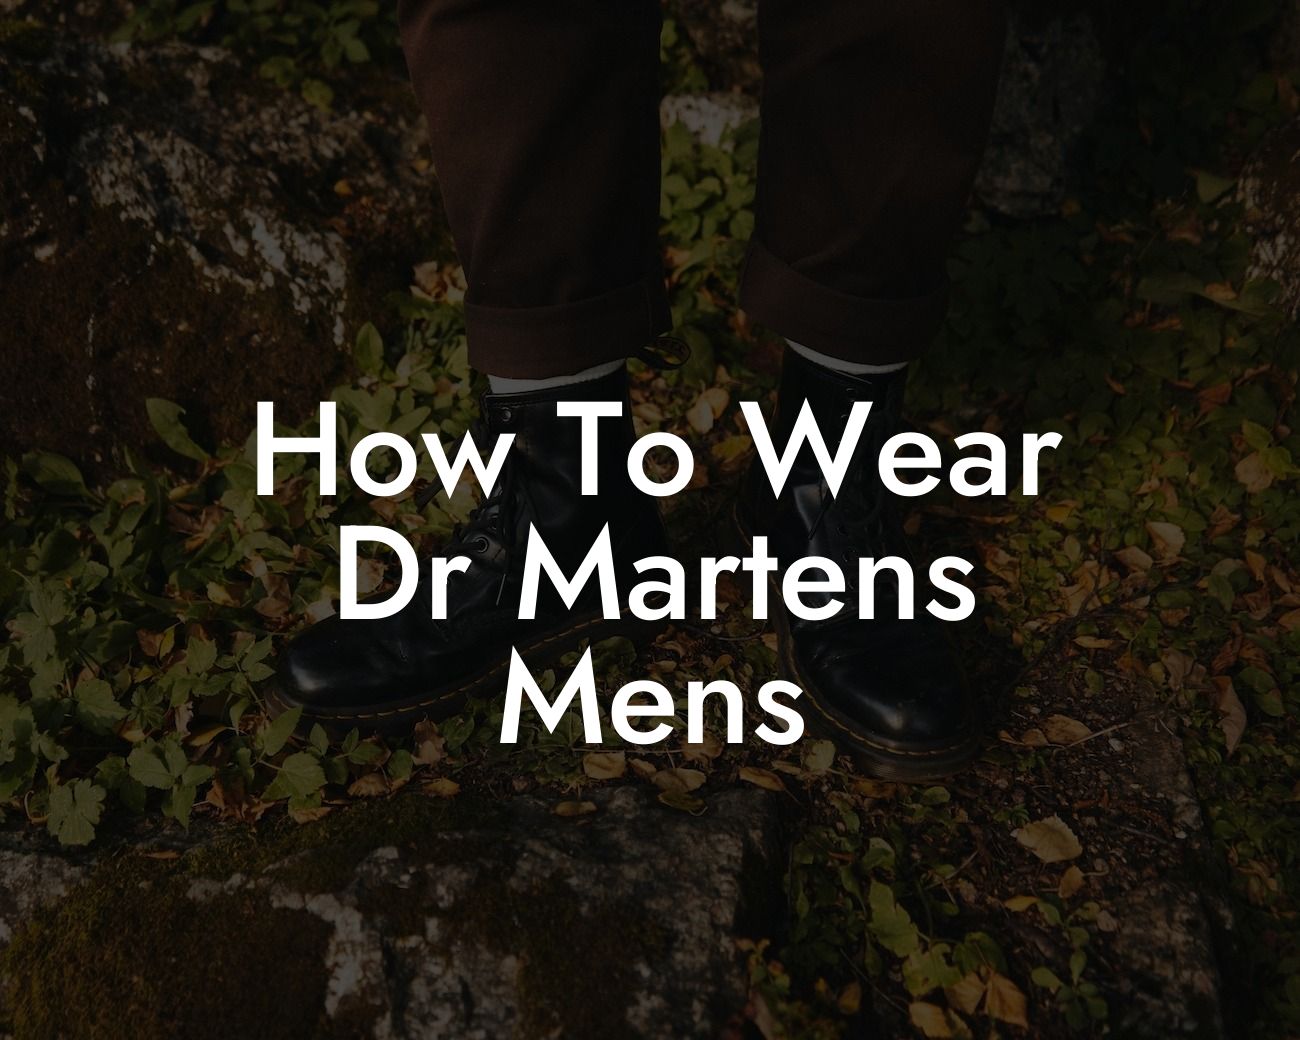 How To Wear Dr Martens Mens